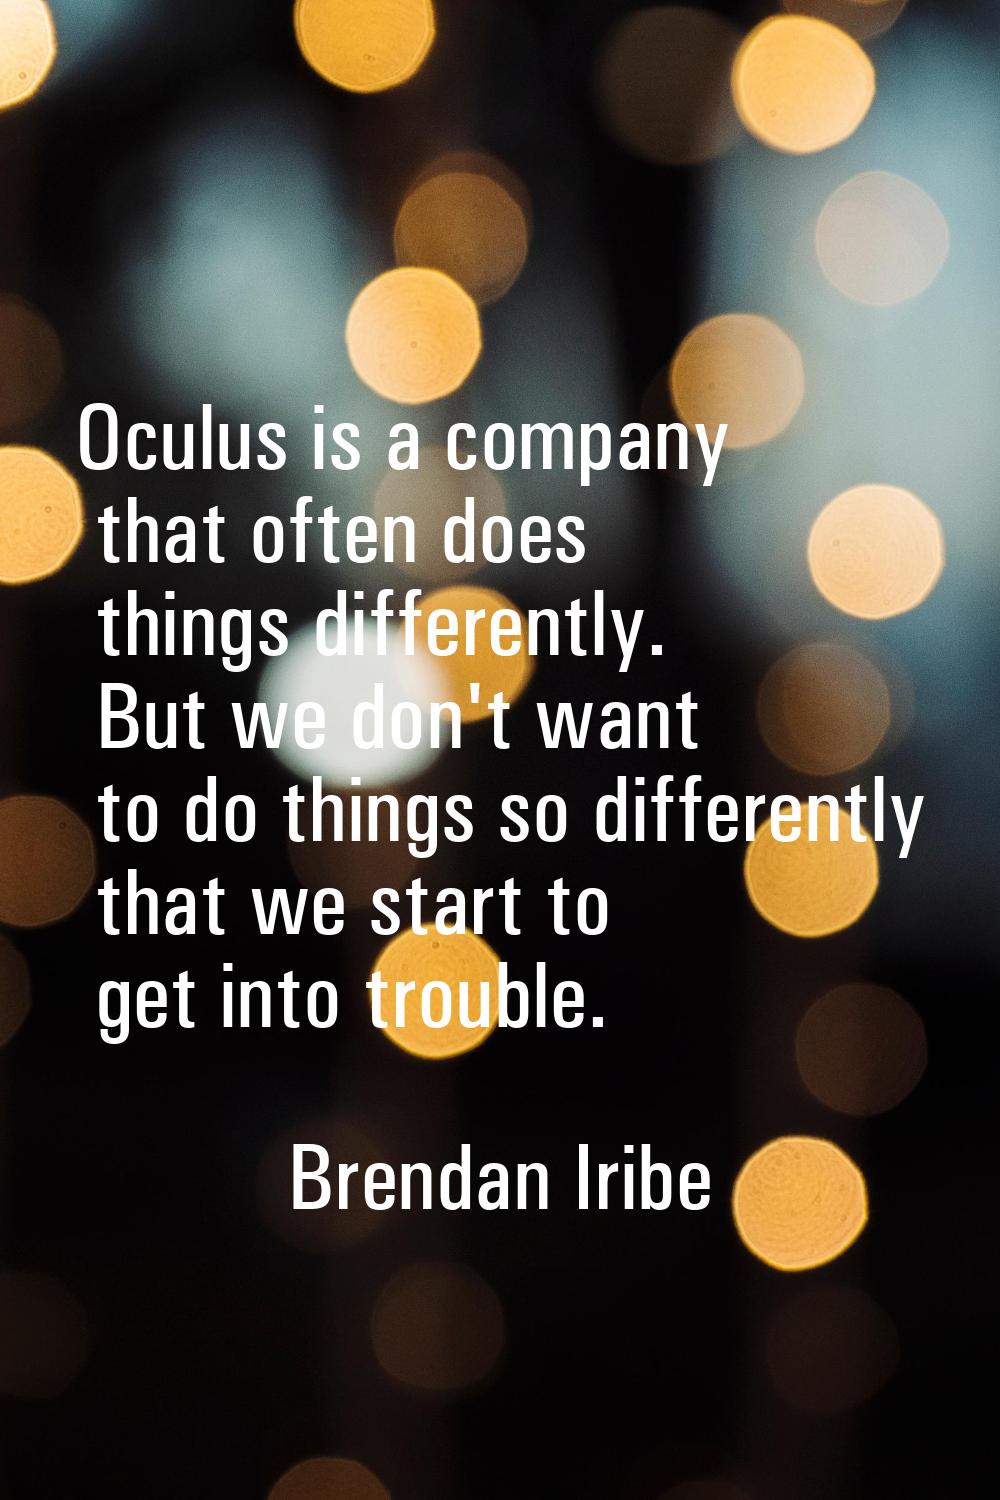 Oculus is a company that often does things differently. But we don't want to do things so different